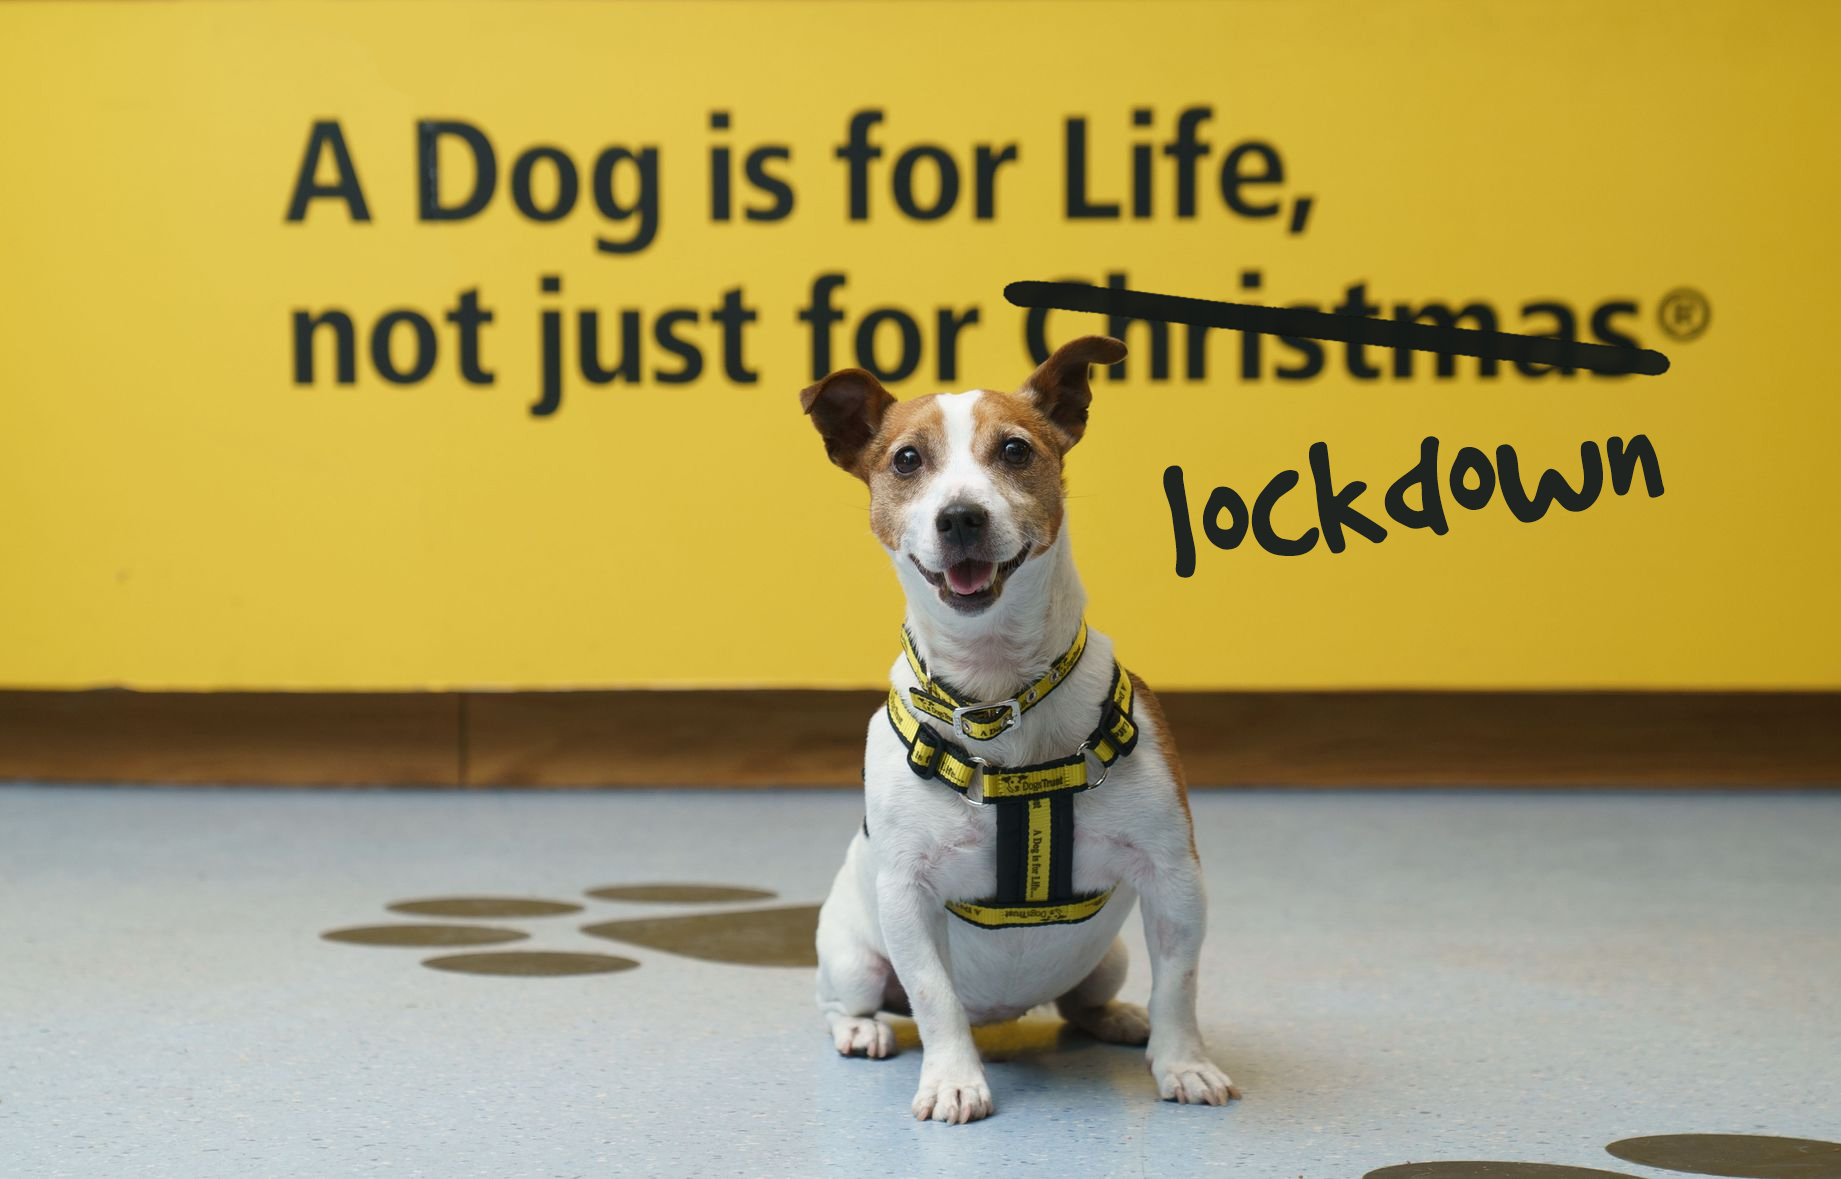 ‘A Dog is for Life, Not Just Lockdown’ – Dogs Trust Campaign Warns about Coming Surge in Pet Abandonment